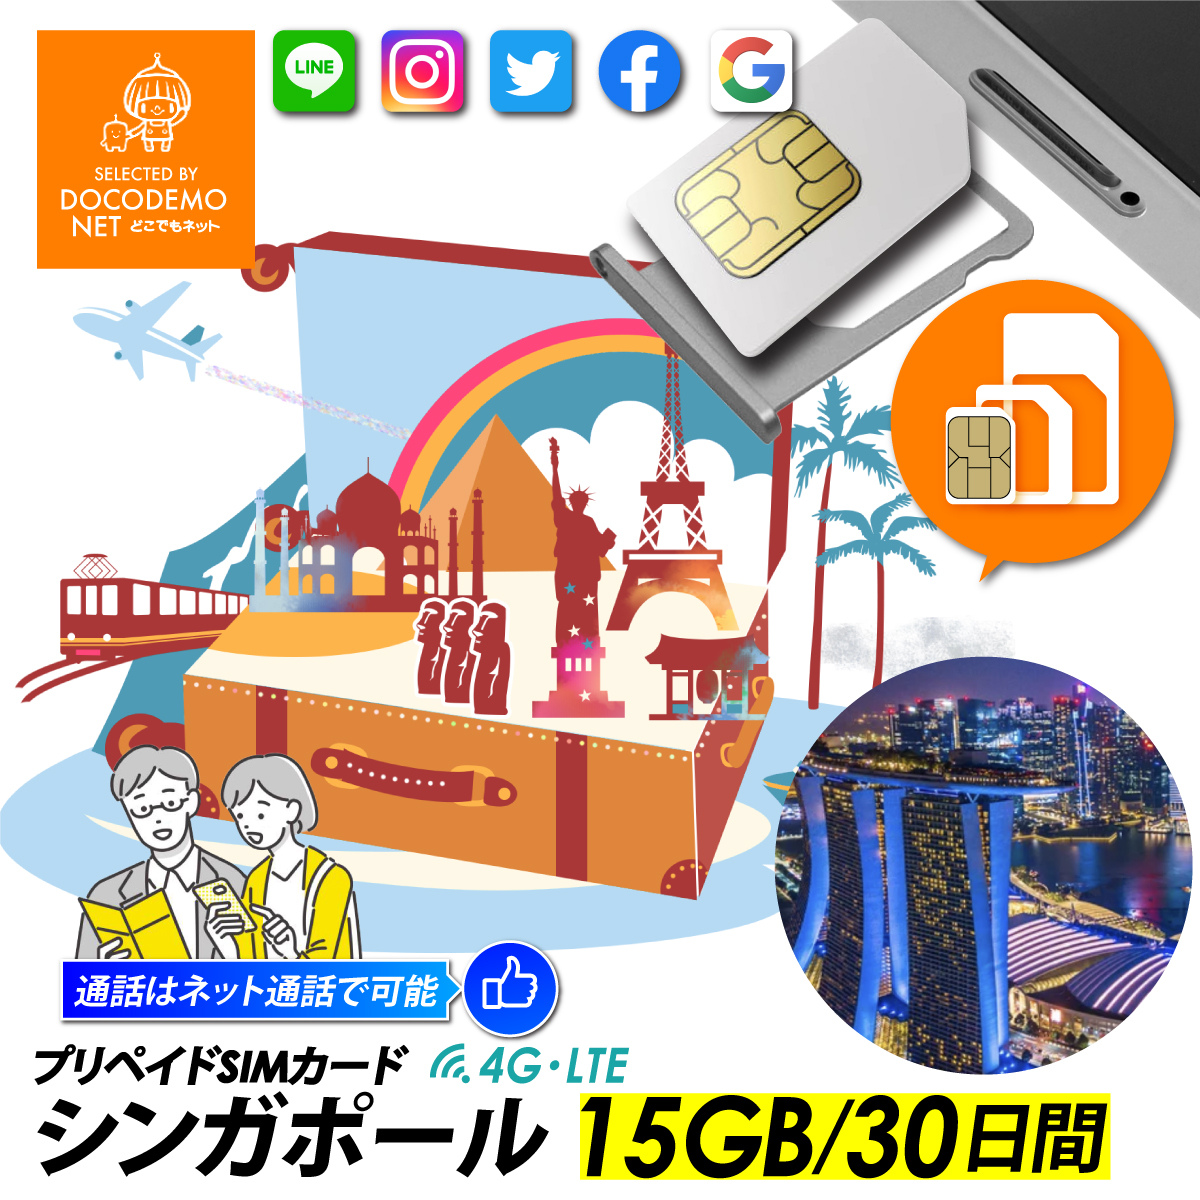  Singapore plipeidoSIM card 4G LTE data communication SIM 15GB/30 days short period studying abroad business trip travel sightseeing business visit actual place .. free shipping same day shipping ....